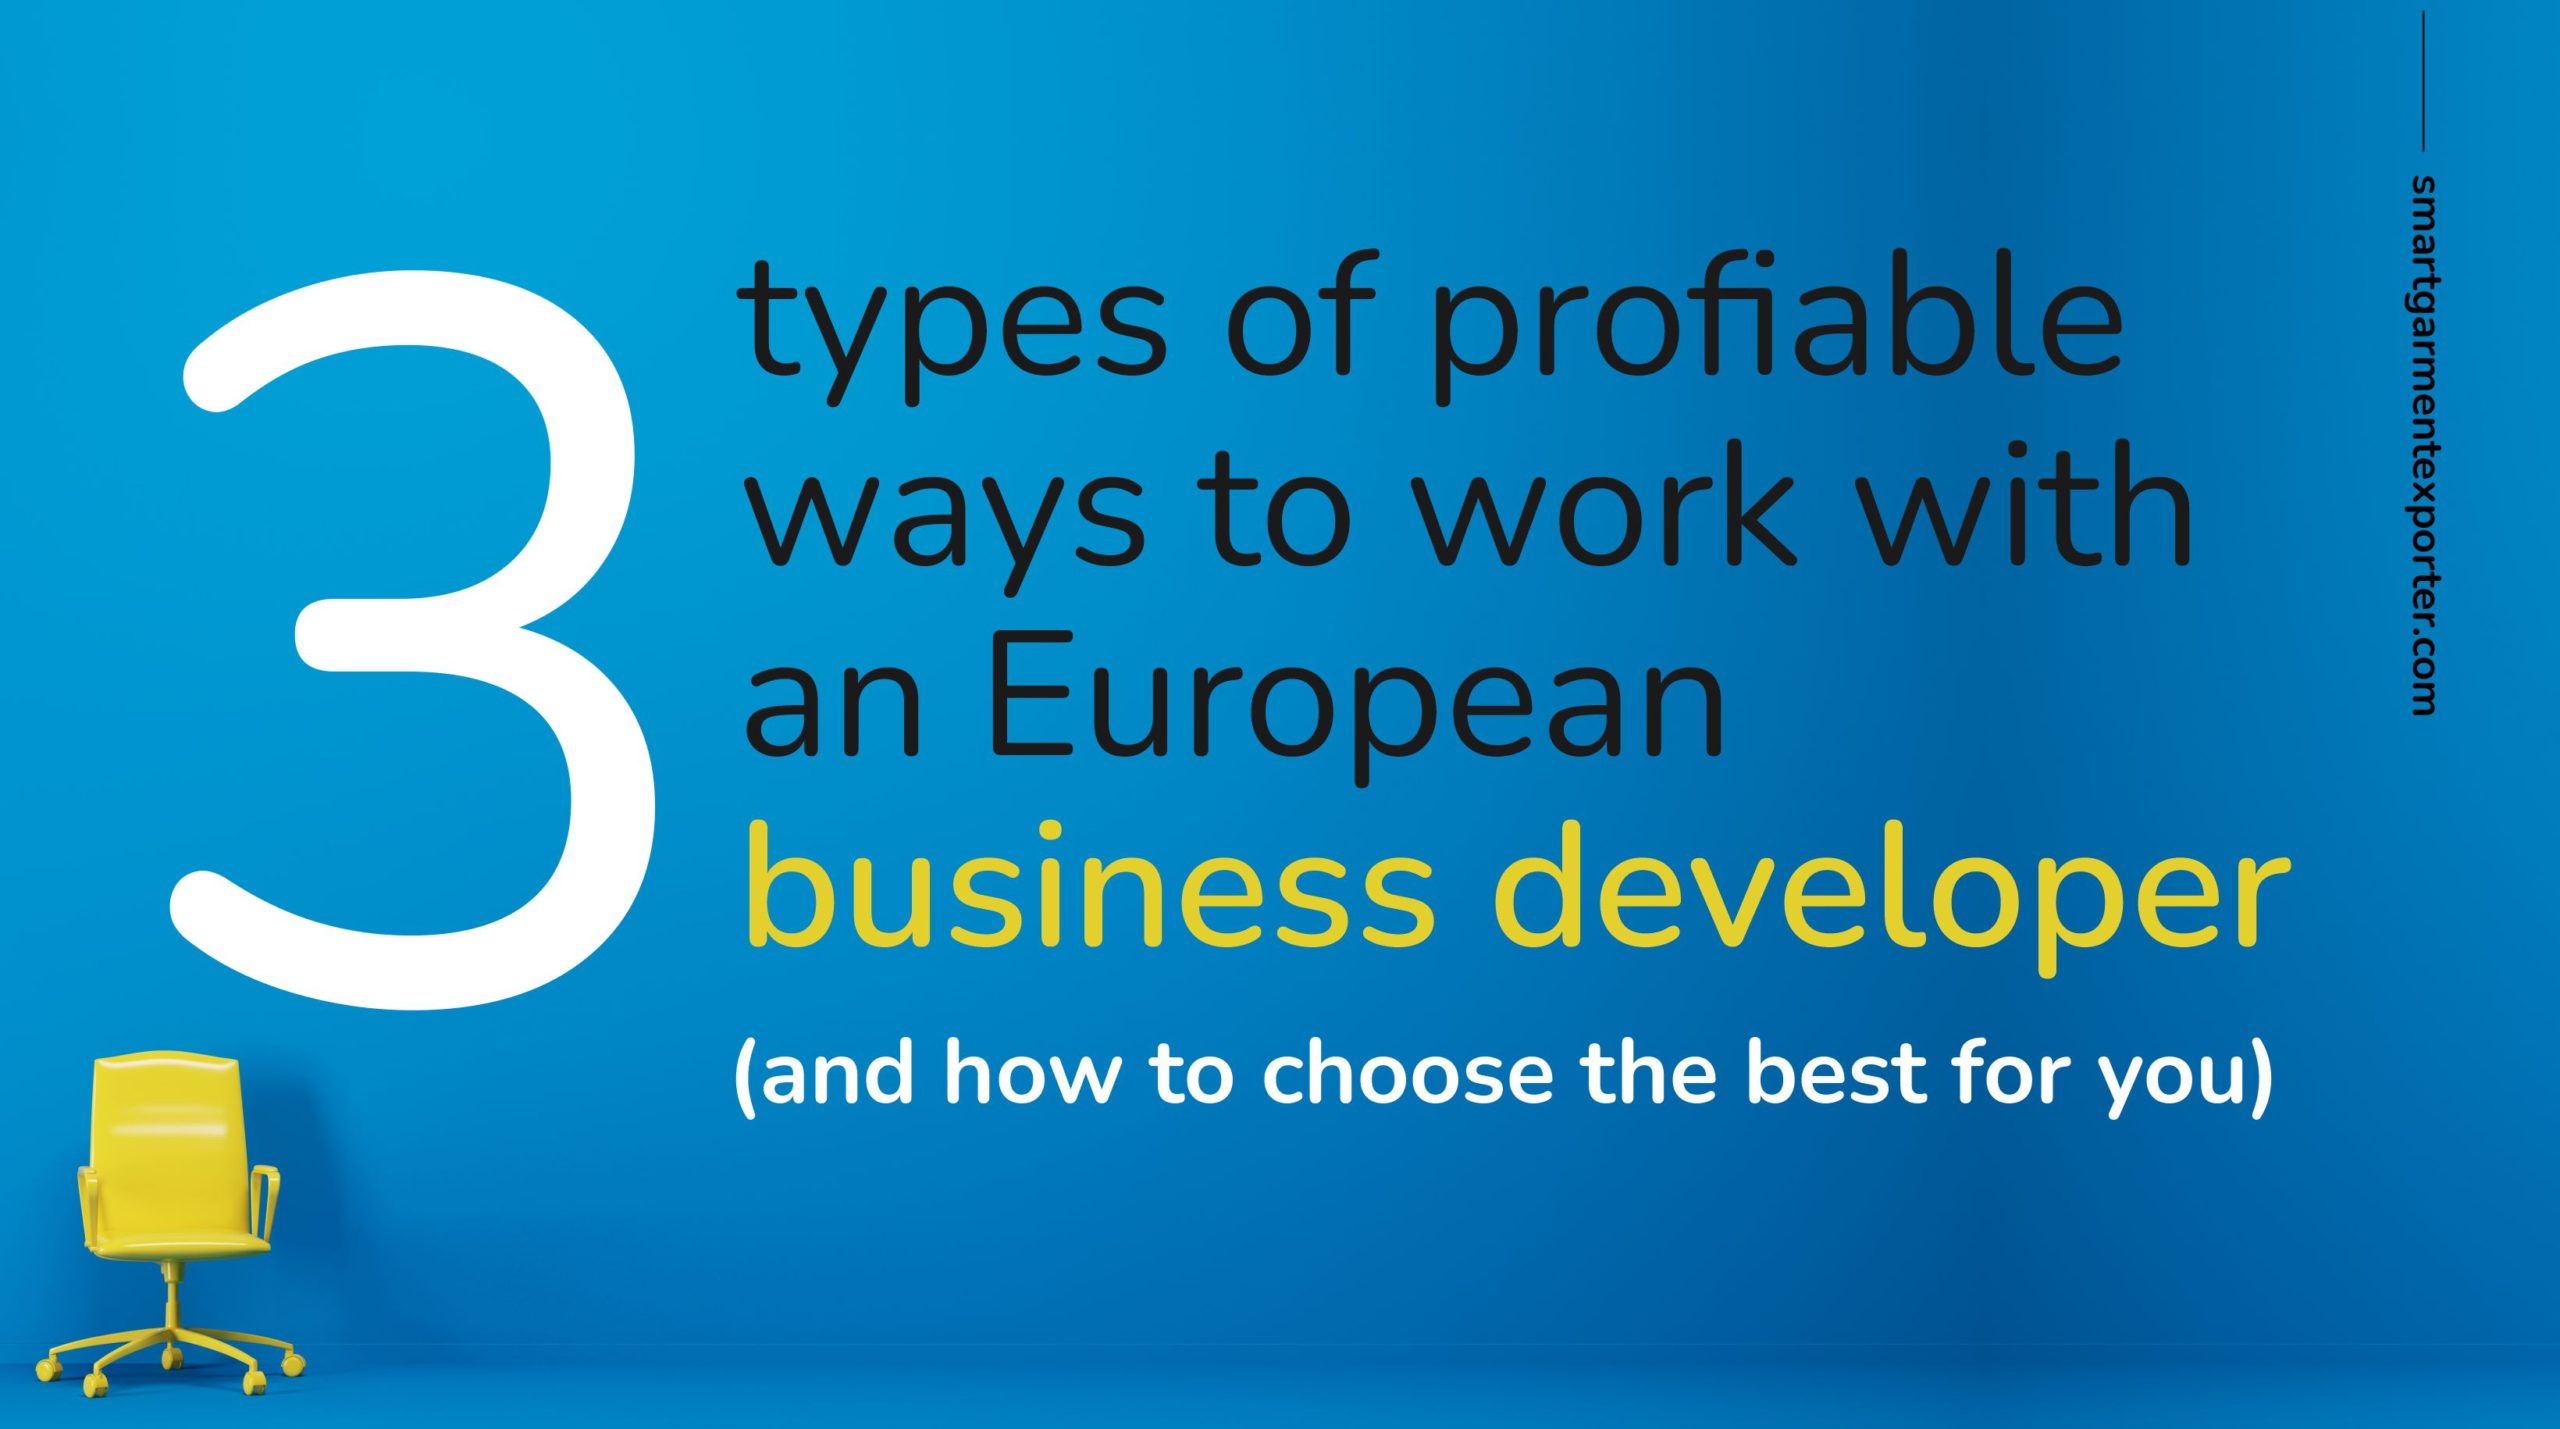 3 types of profitable ways to work with an European business developer (and how to choose the best for your business)